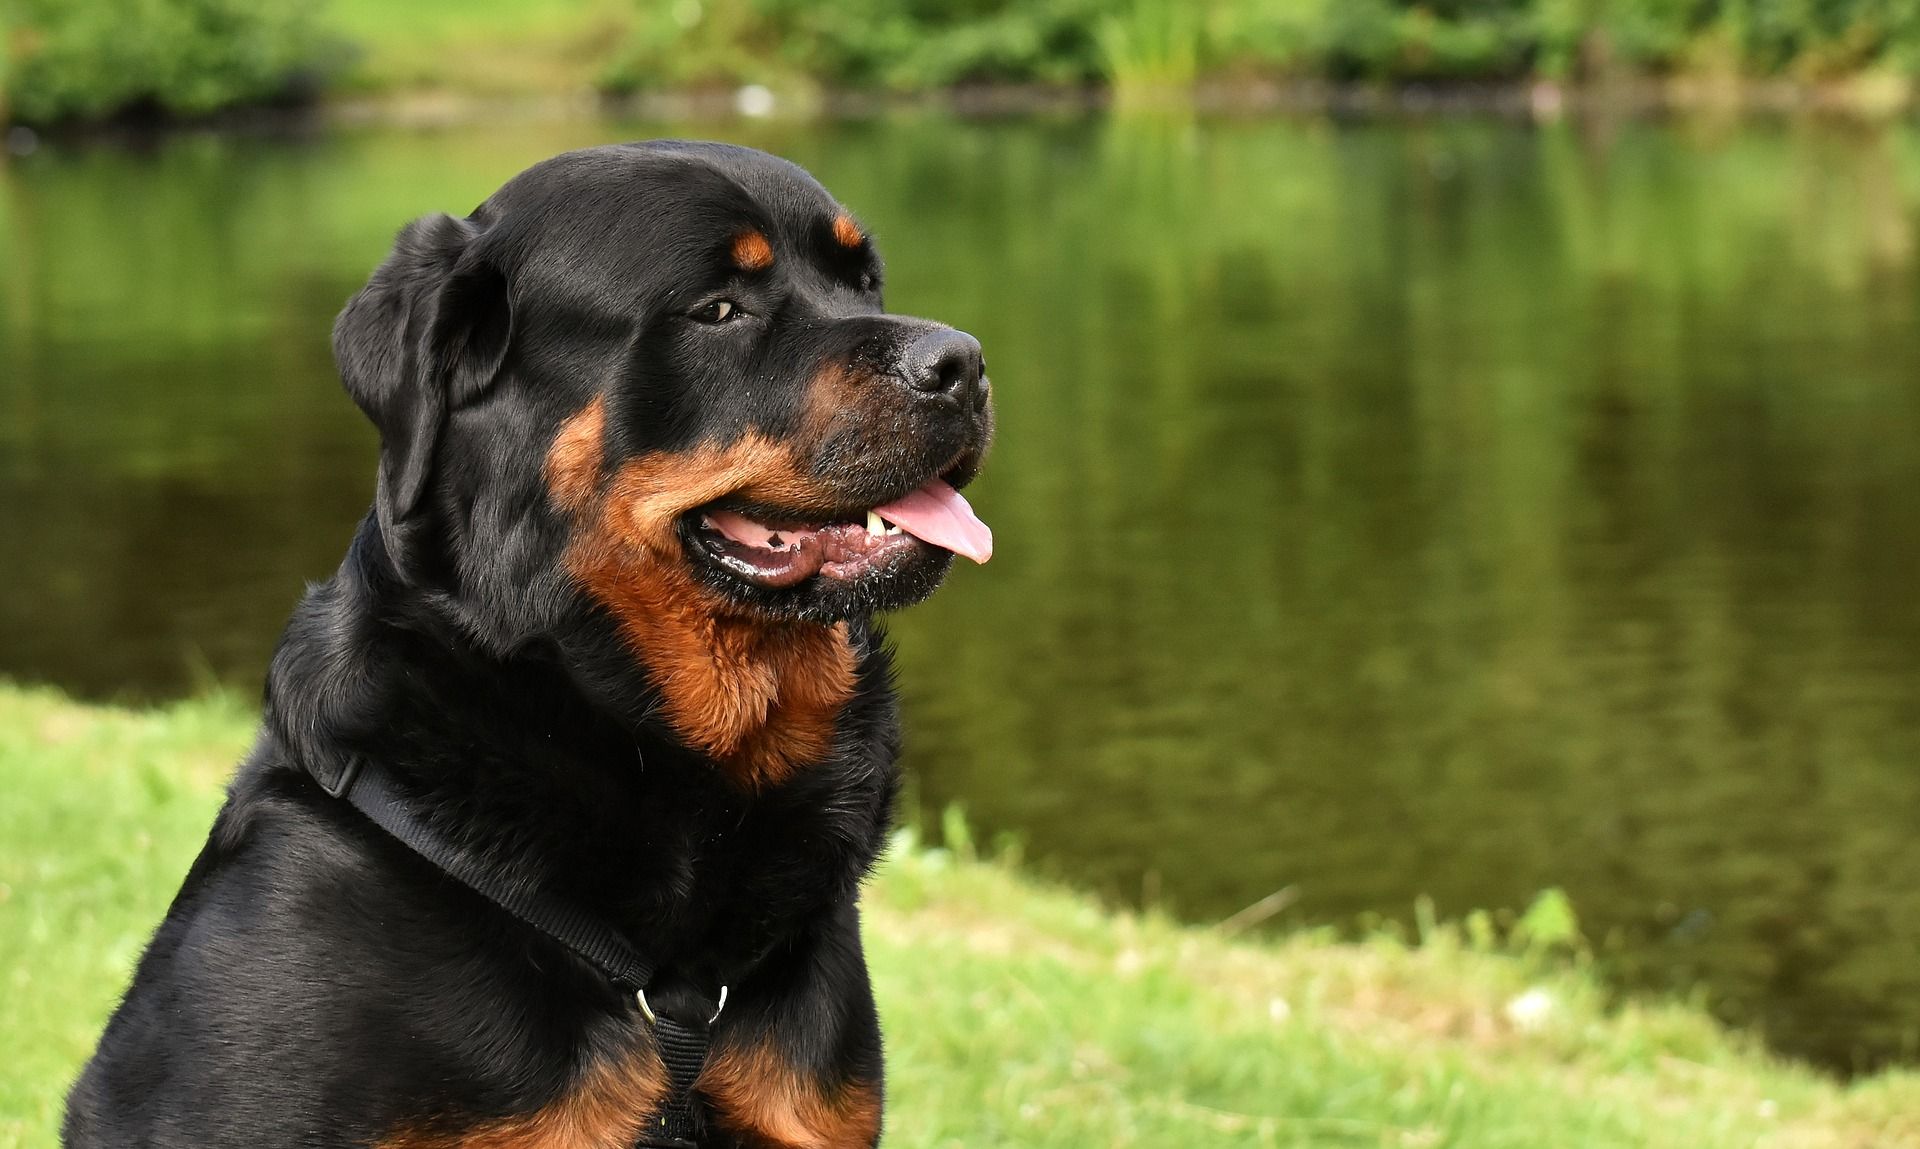 what age do rottweilers slow down?